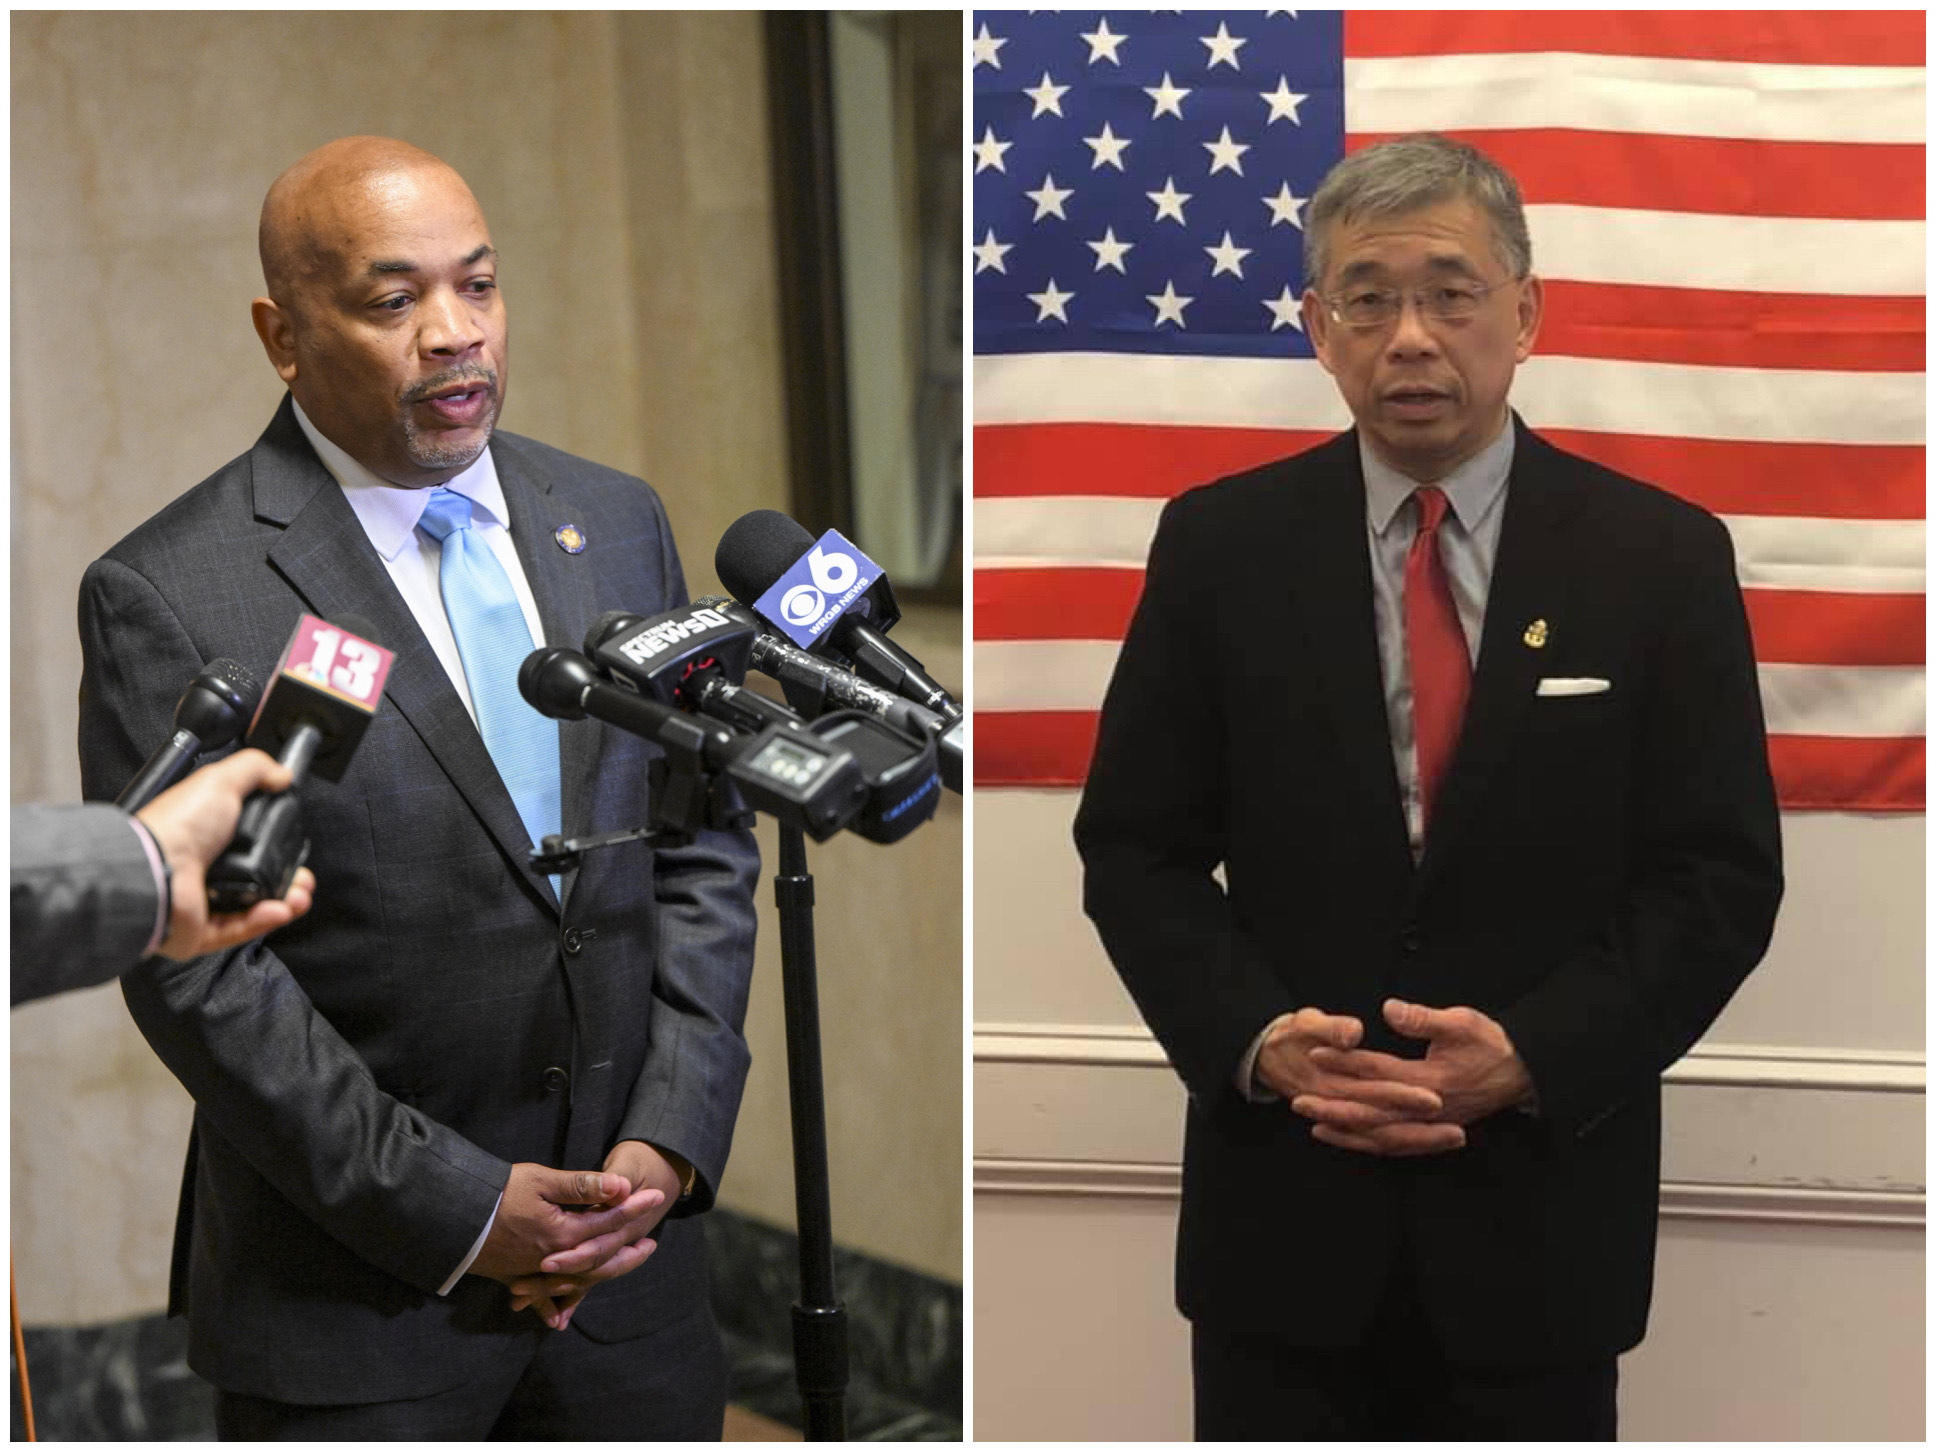 Speaker Carl Heastie (left) says "serious questions have been raised regarding the status of Assemblymember-elect Lester Chang’s eligibility to assume office given the residency requirements for service in the New York State Assembly."